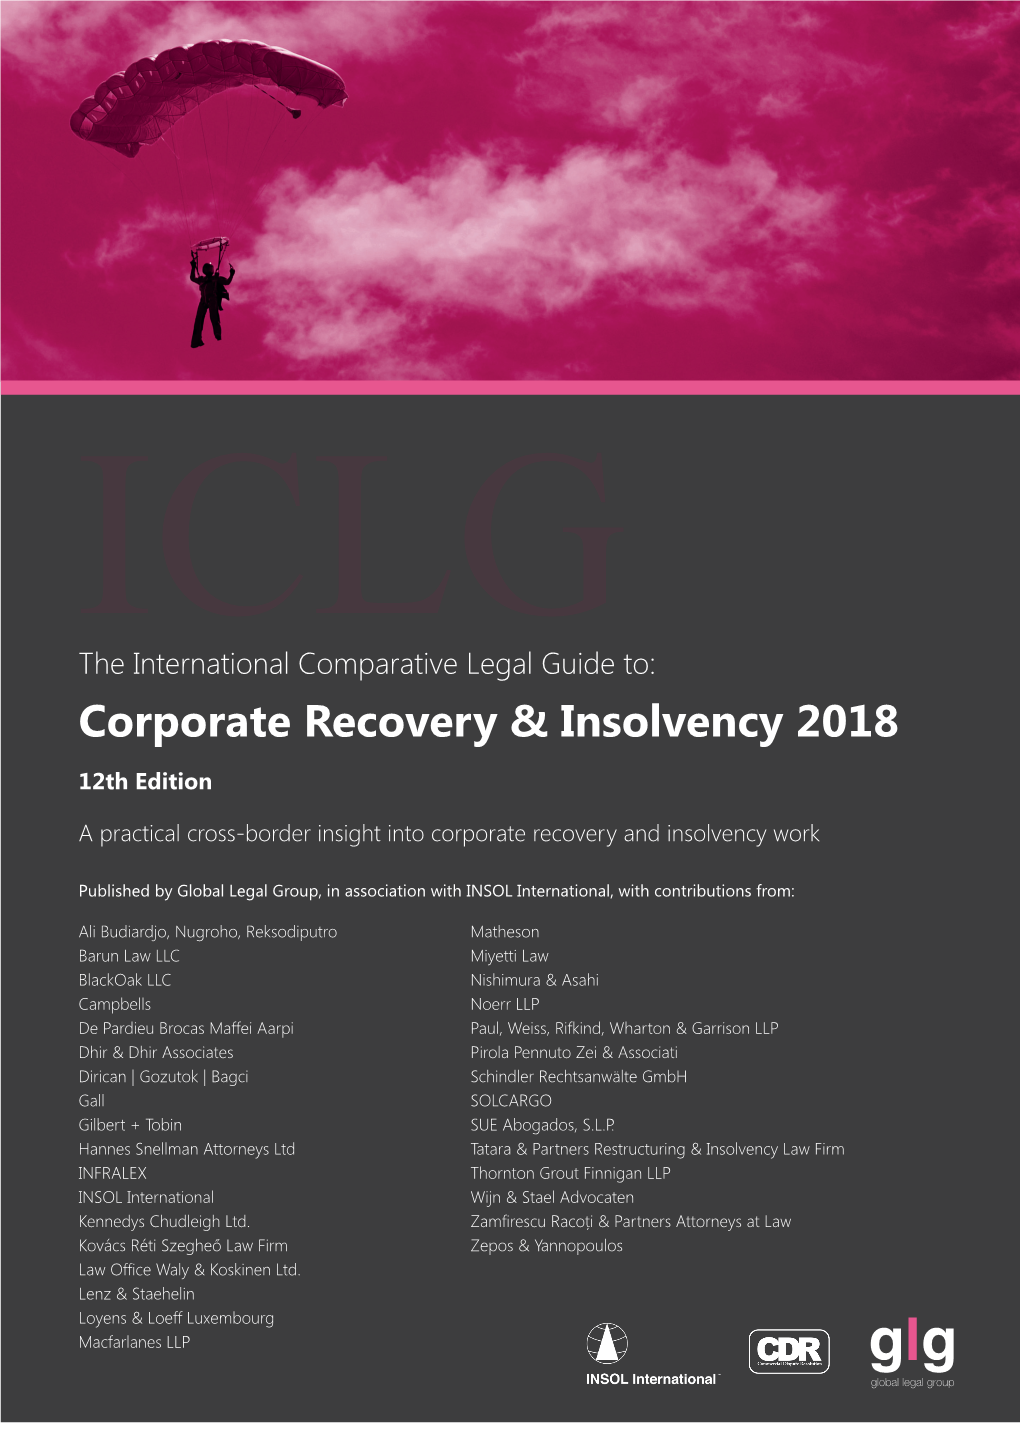 Corporate Recovery & Insolvency 2018